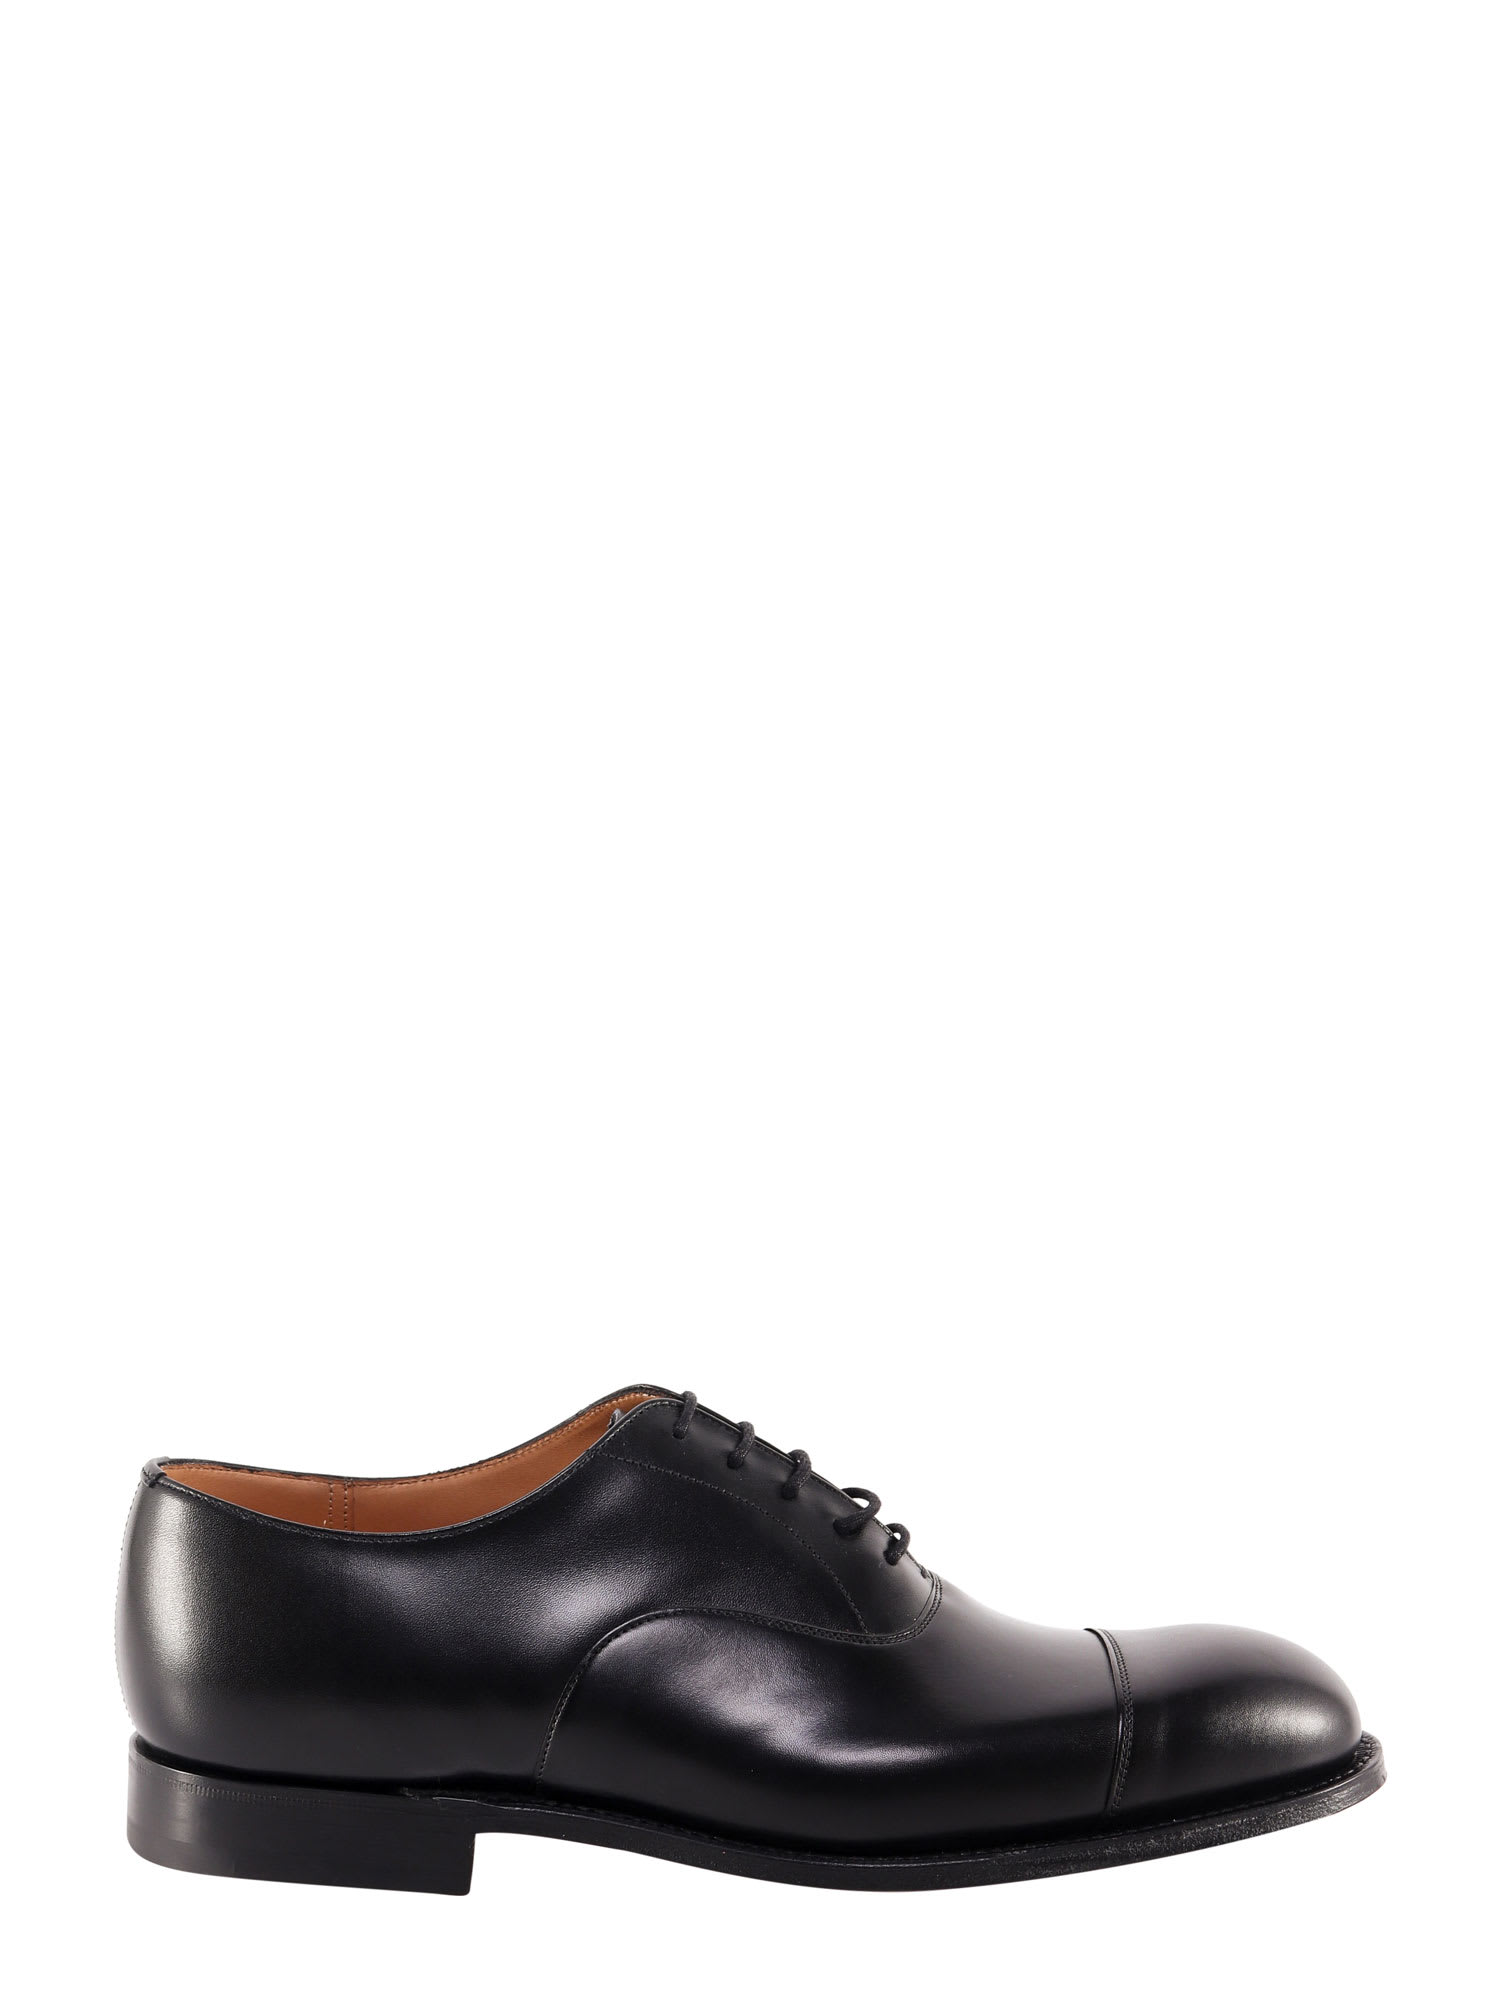 Church's Consult 173 Lace-up Shoe